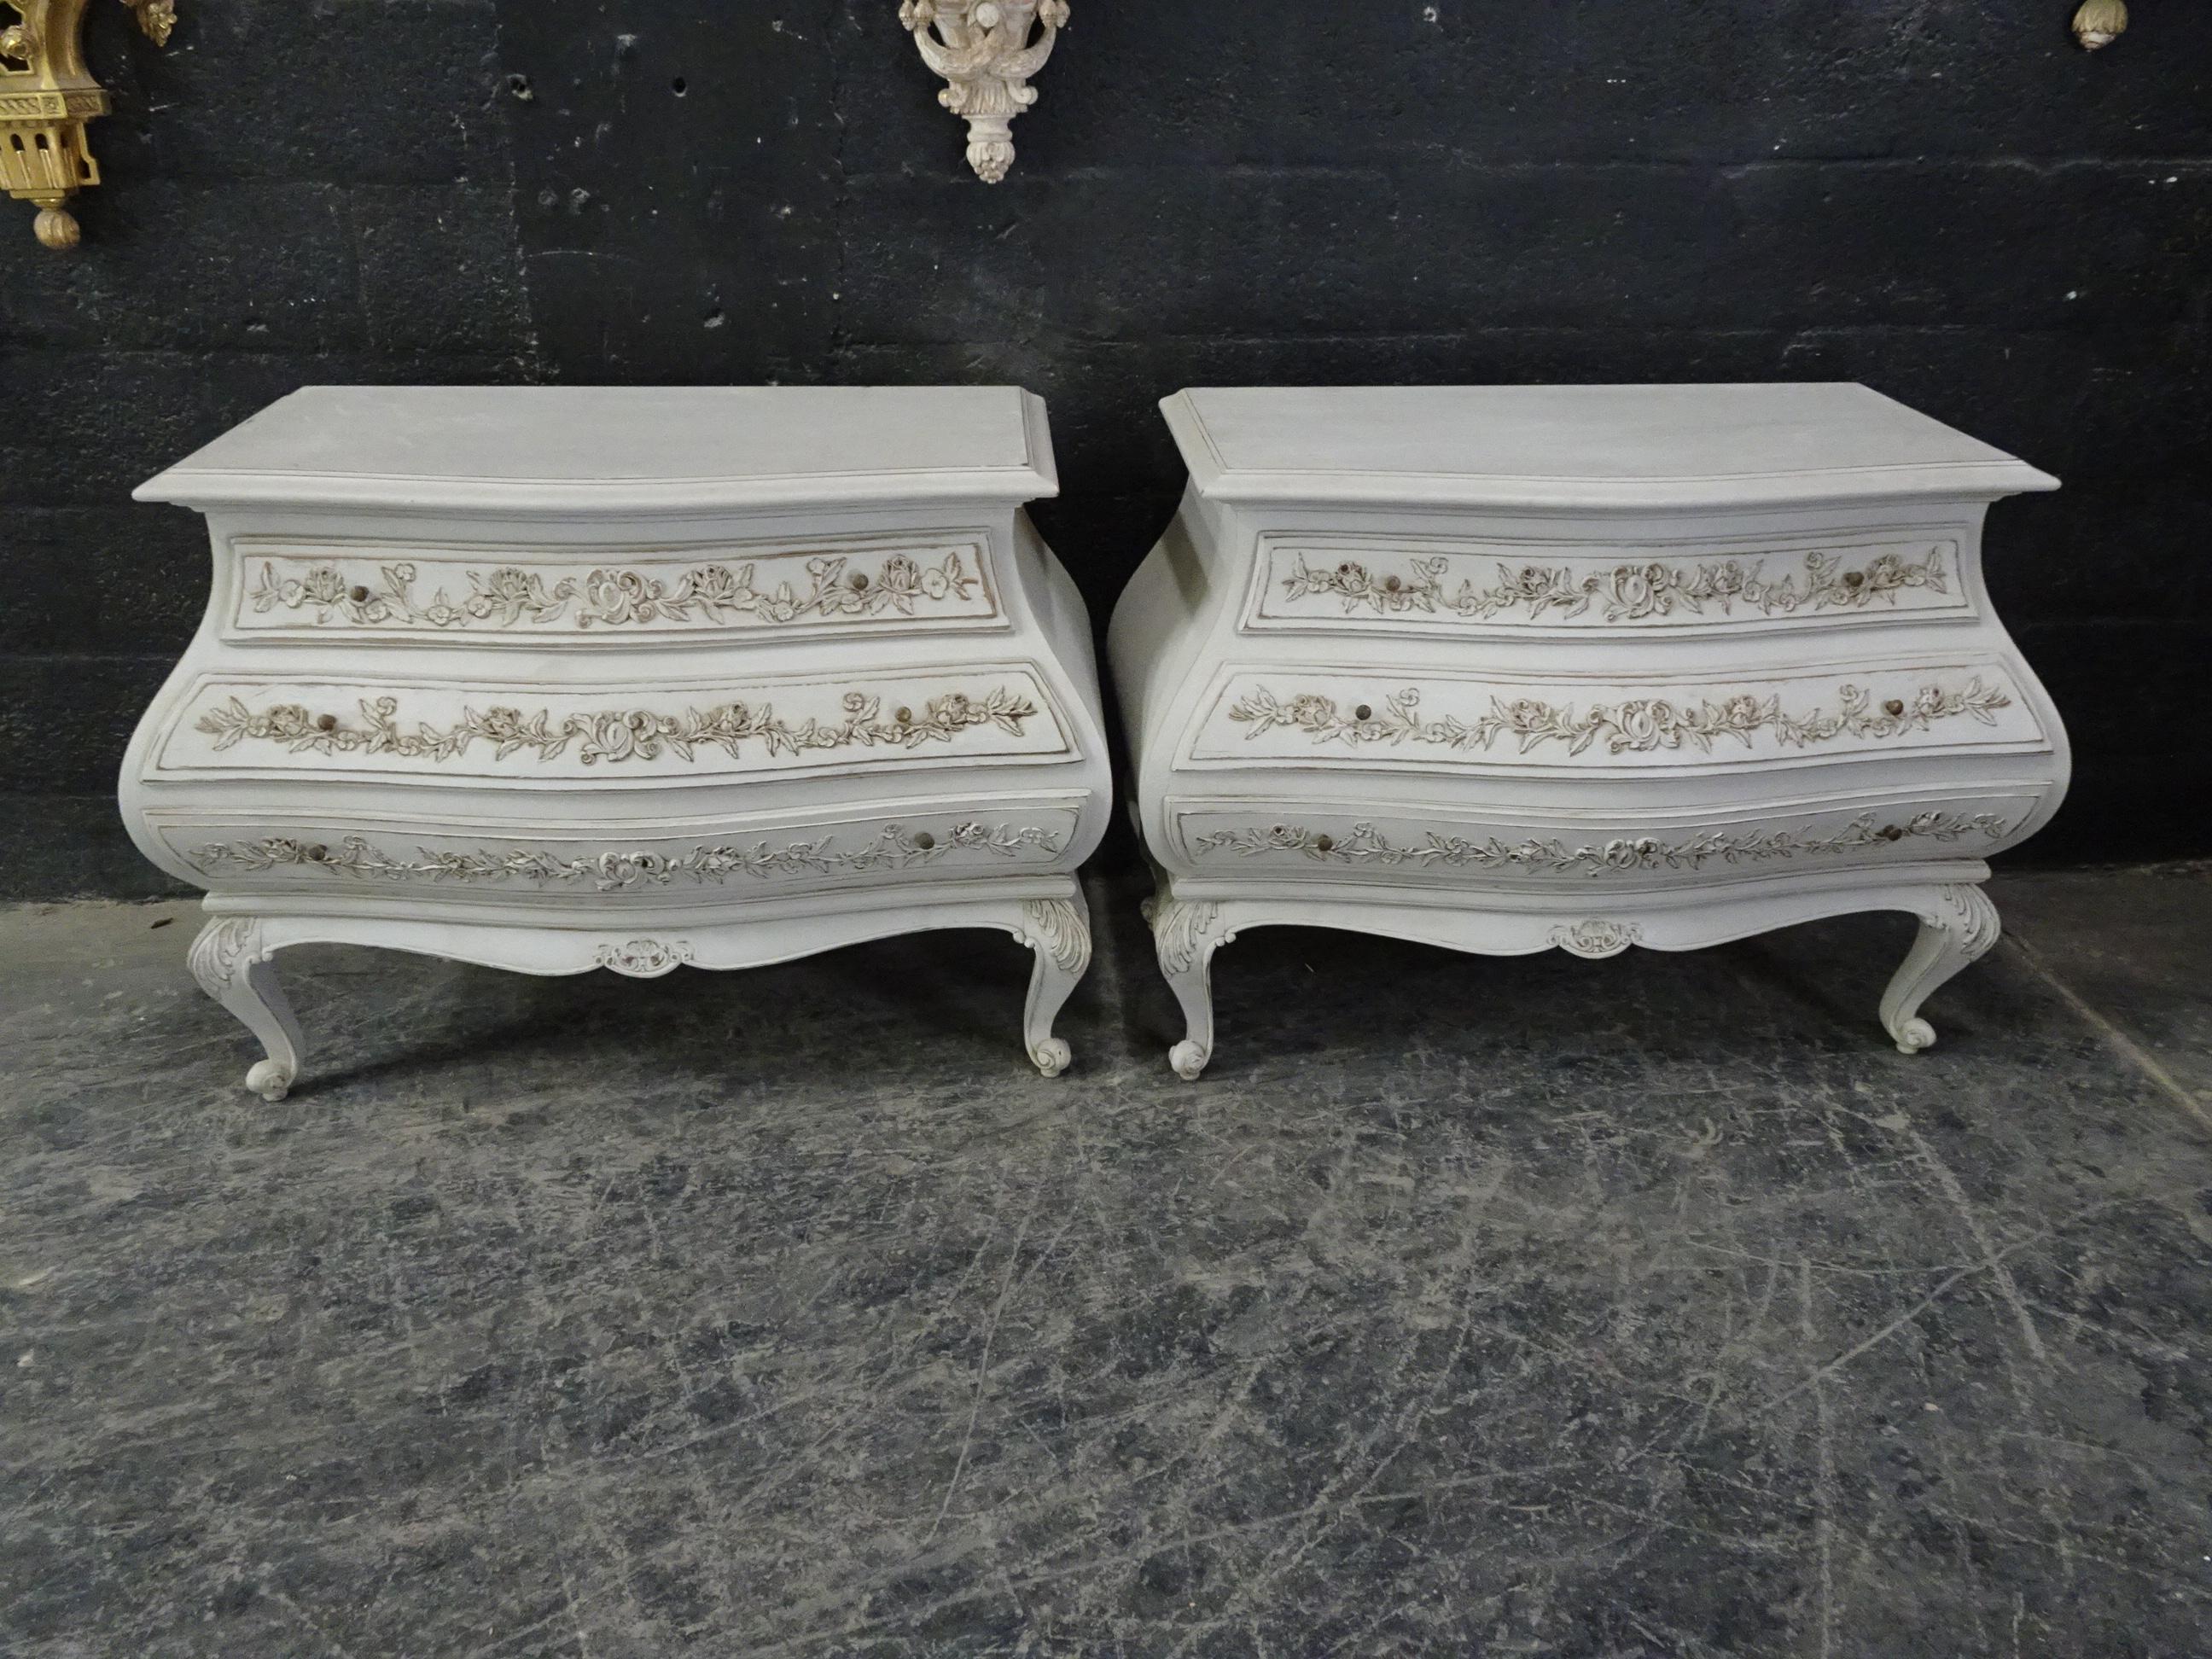 This is a set of 2 carved Rococo style chest of drawers. They have been restored and repainted with milk paints 